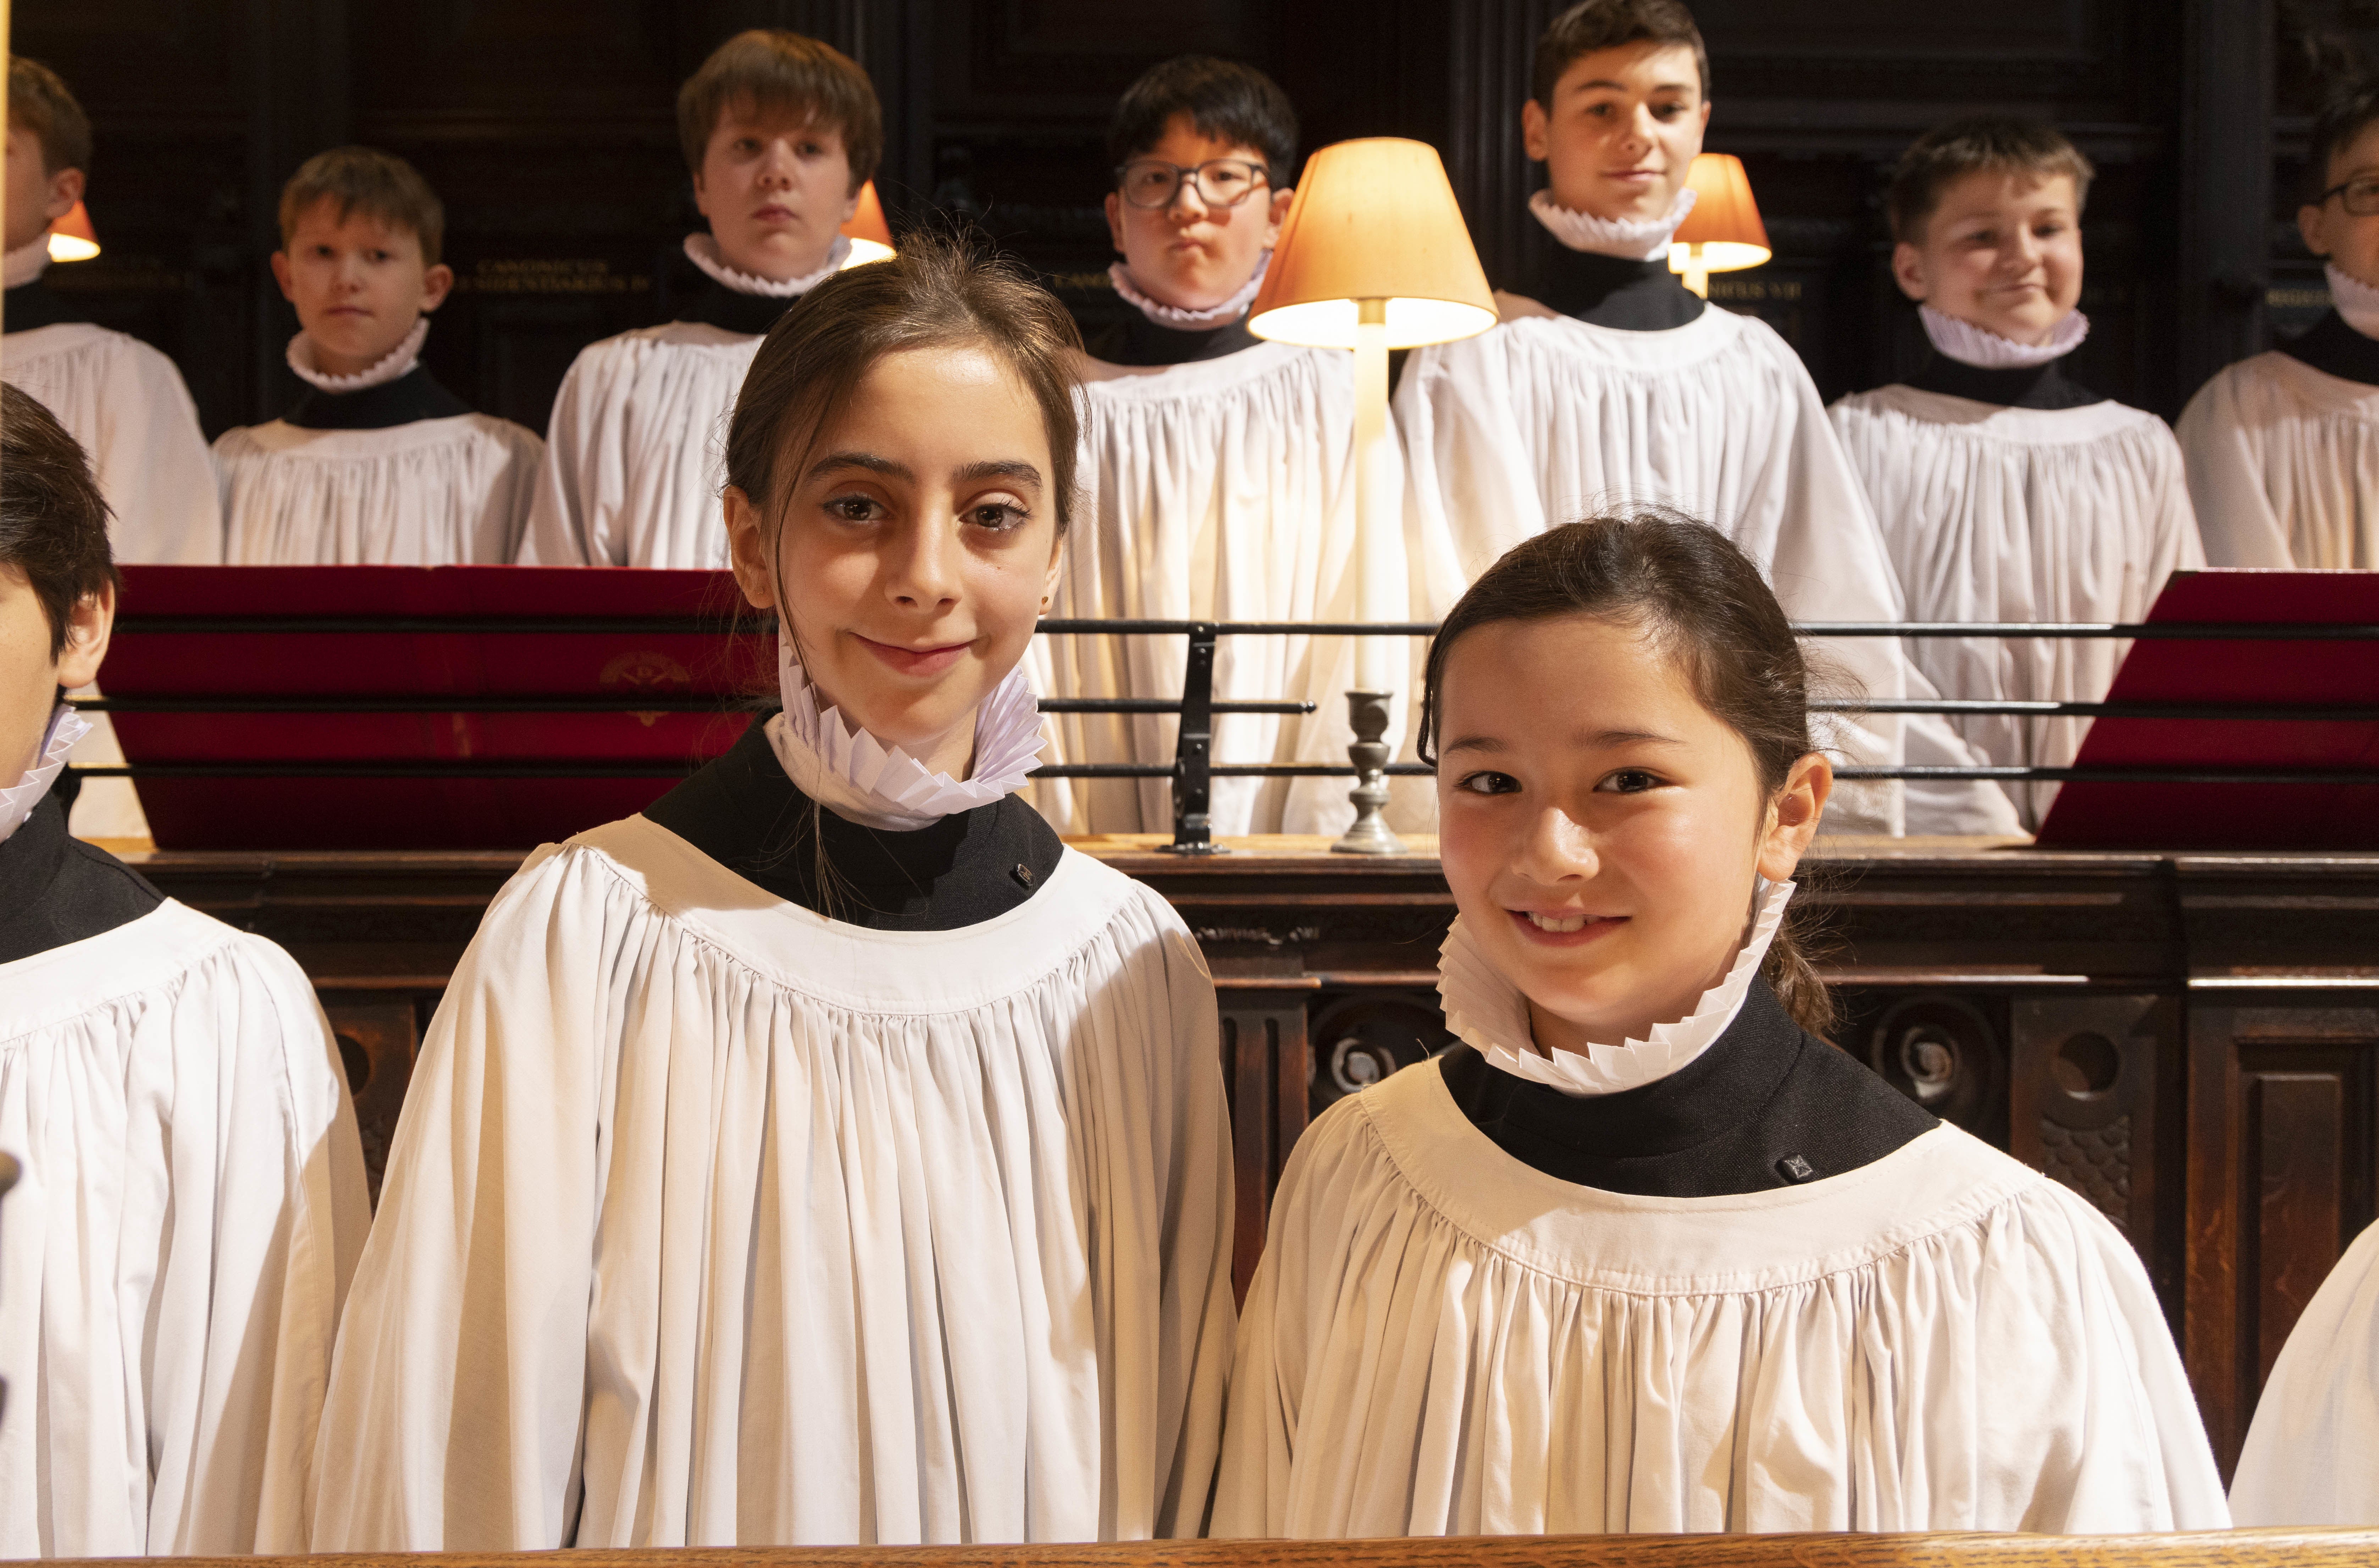 Choristers Lila, 11 and Lois (right), 10, at St Paul’s Cathedral in London (Tim Anderson/PA)